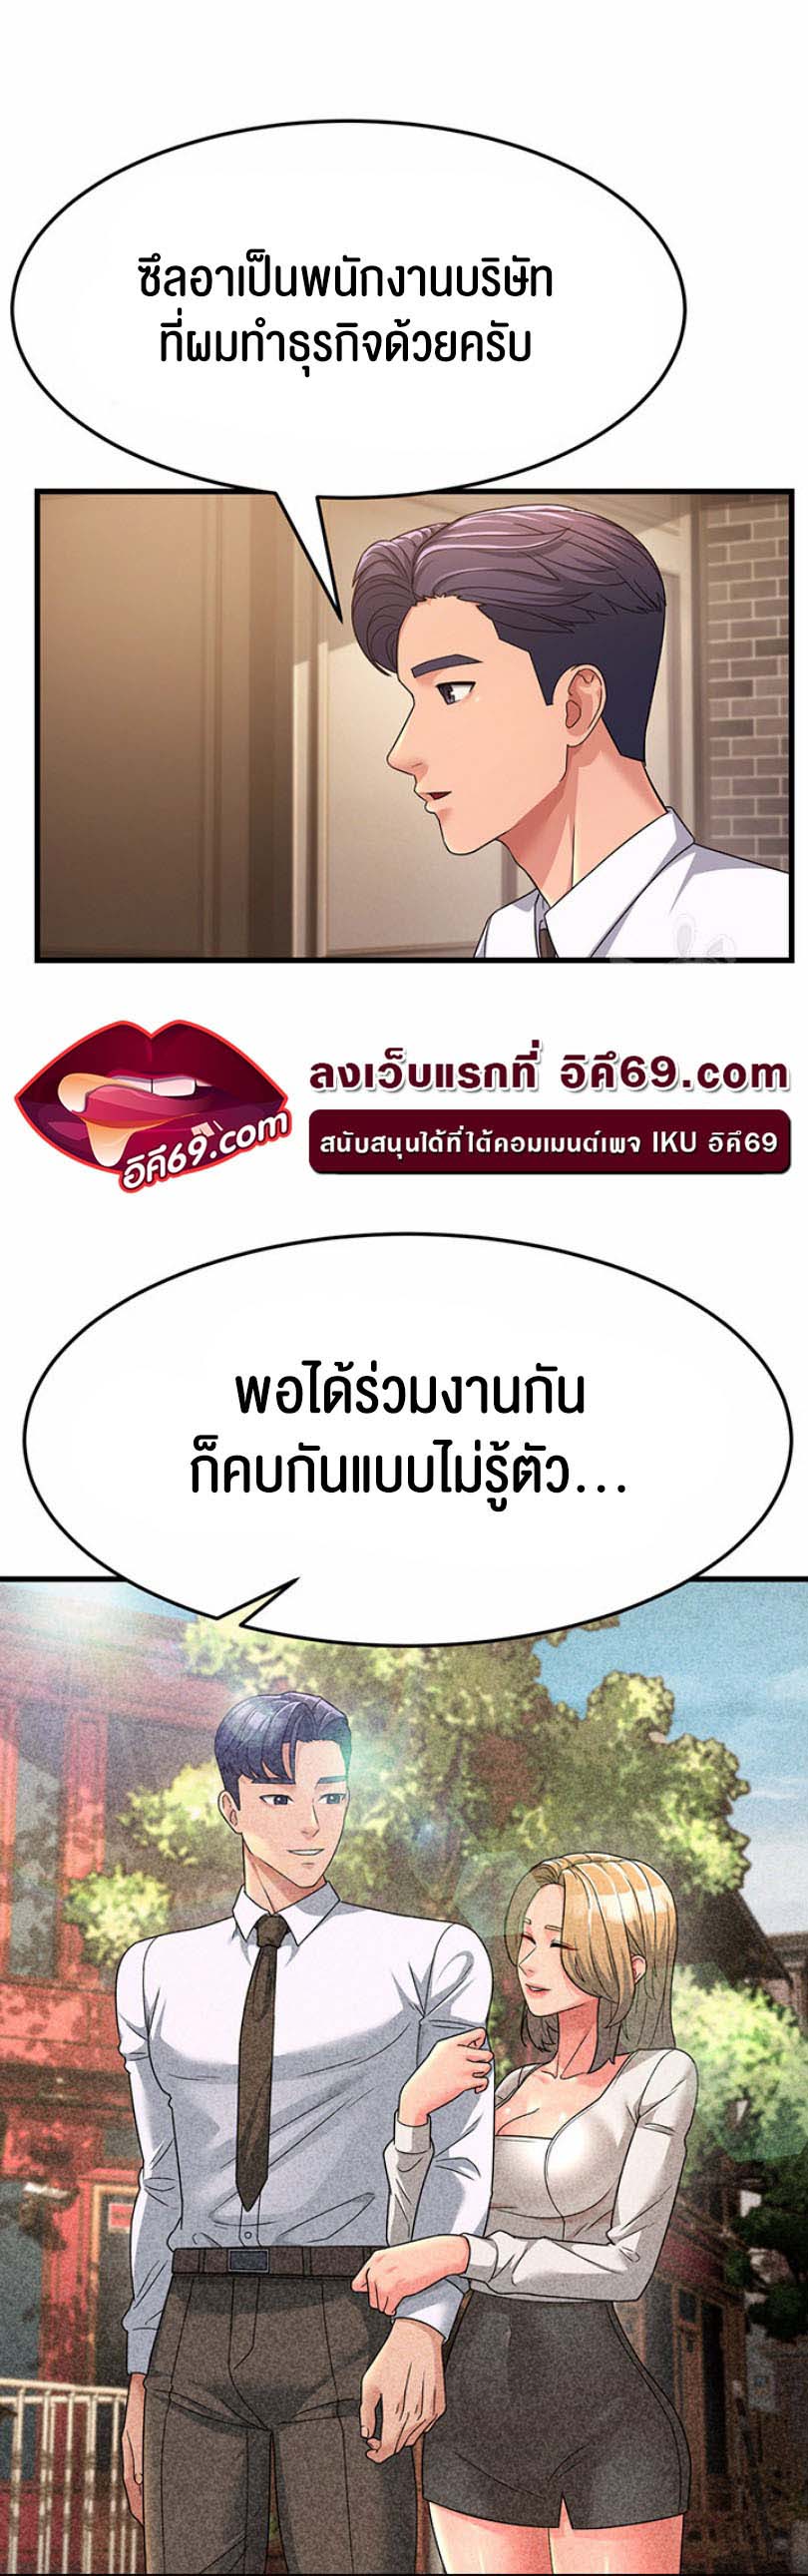 à¸­à¹ˆà¸²à¸™à¹‚à¸”à¸ˆà¸´à¸™ à¹€à¸£à¸·à¹ˆà¸­à¸‡ Mother in Law Bends To My Will 9 15